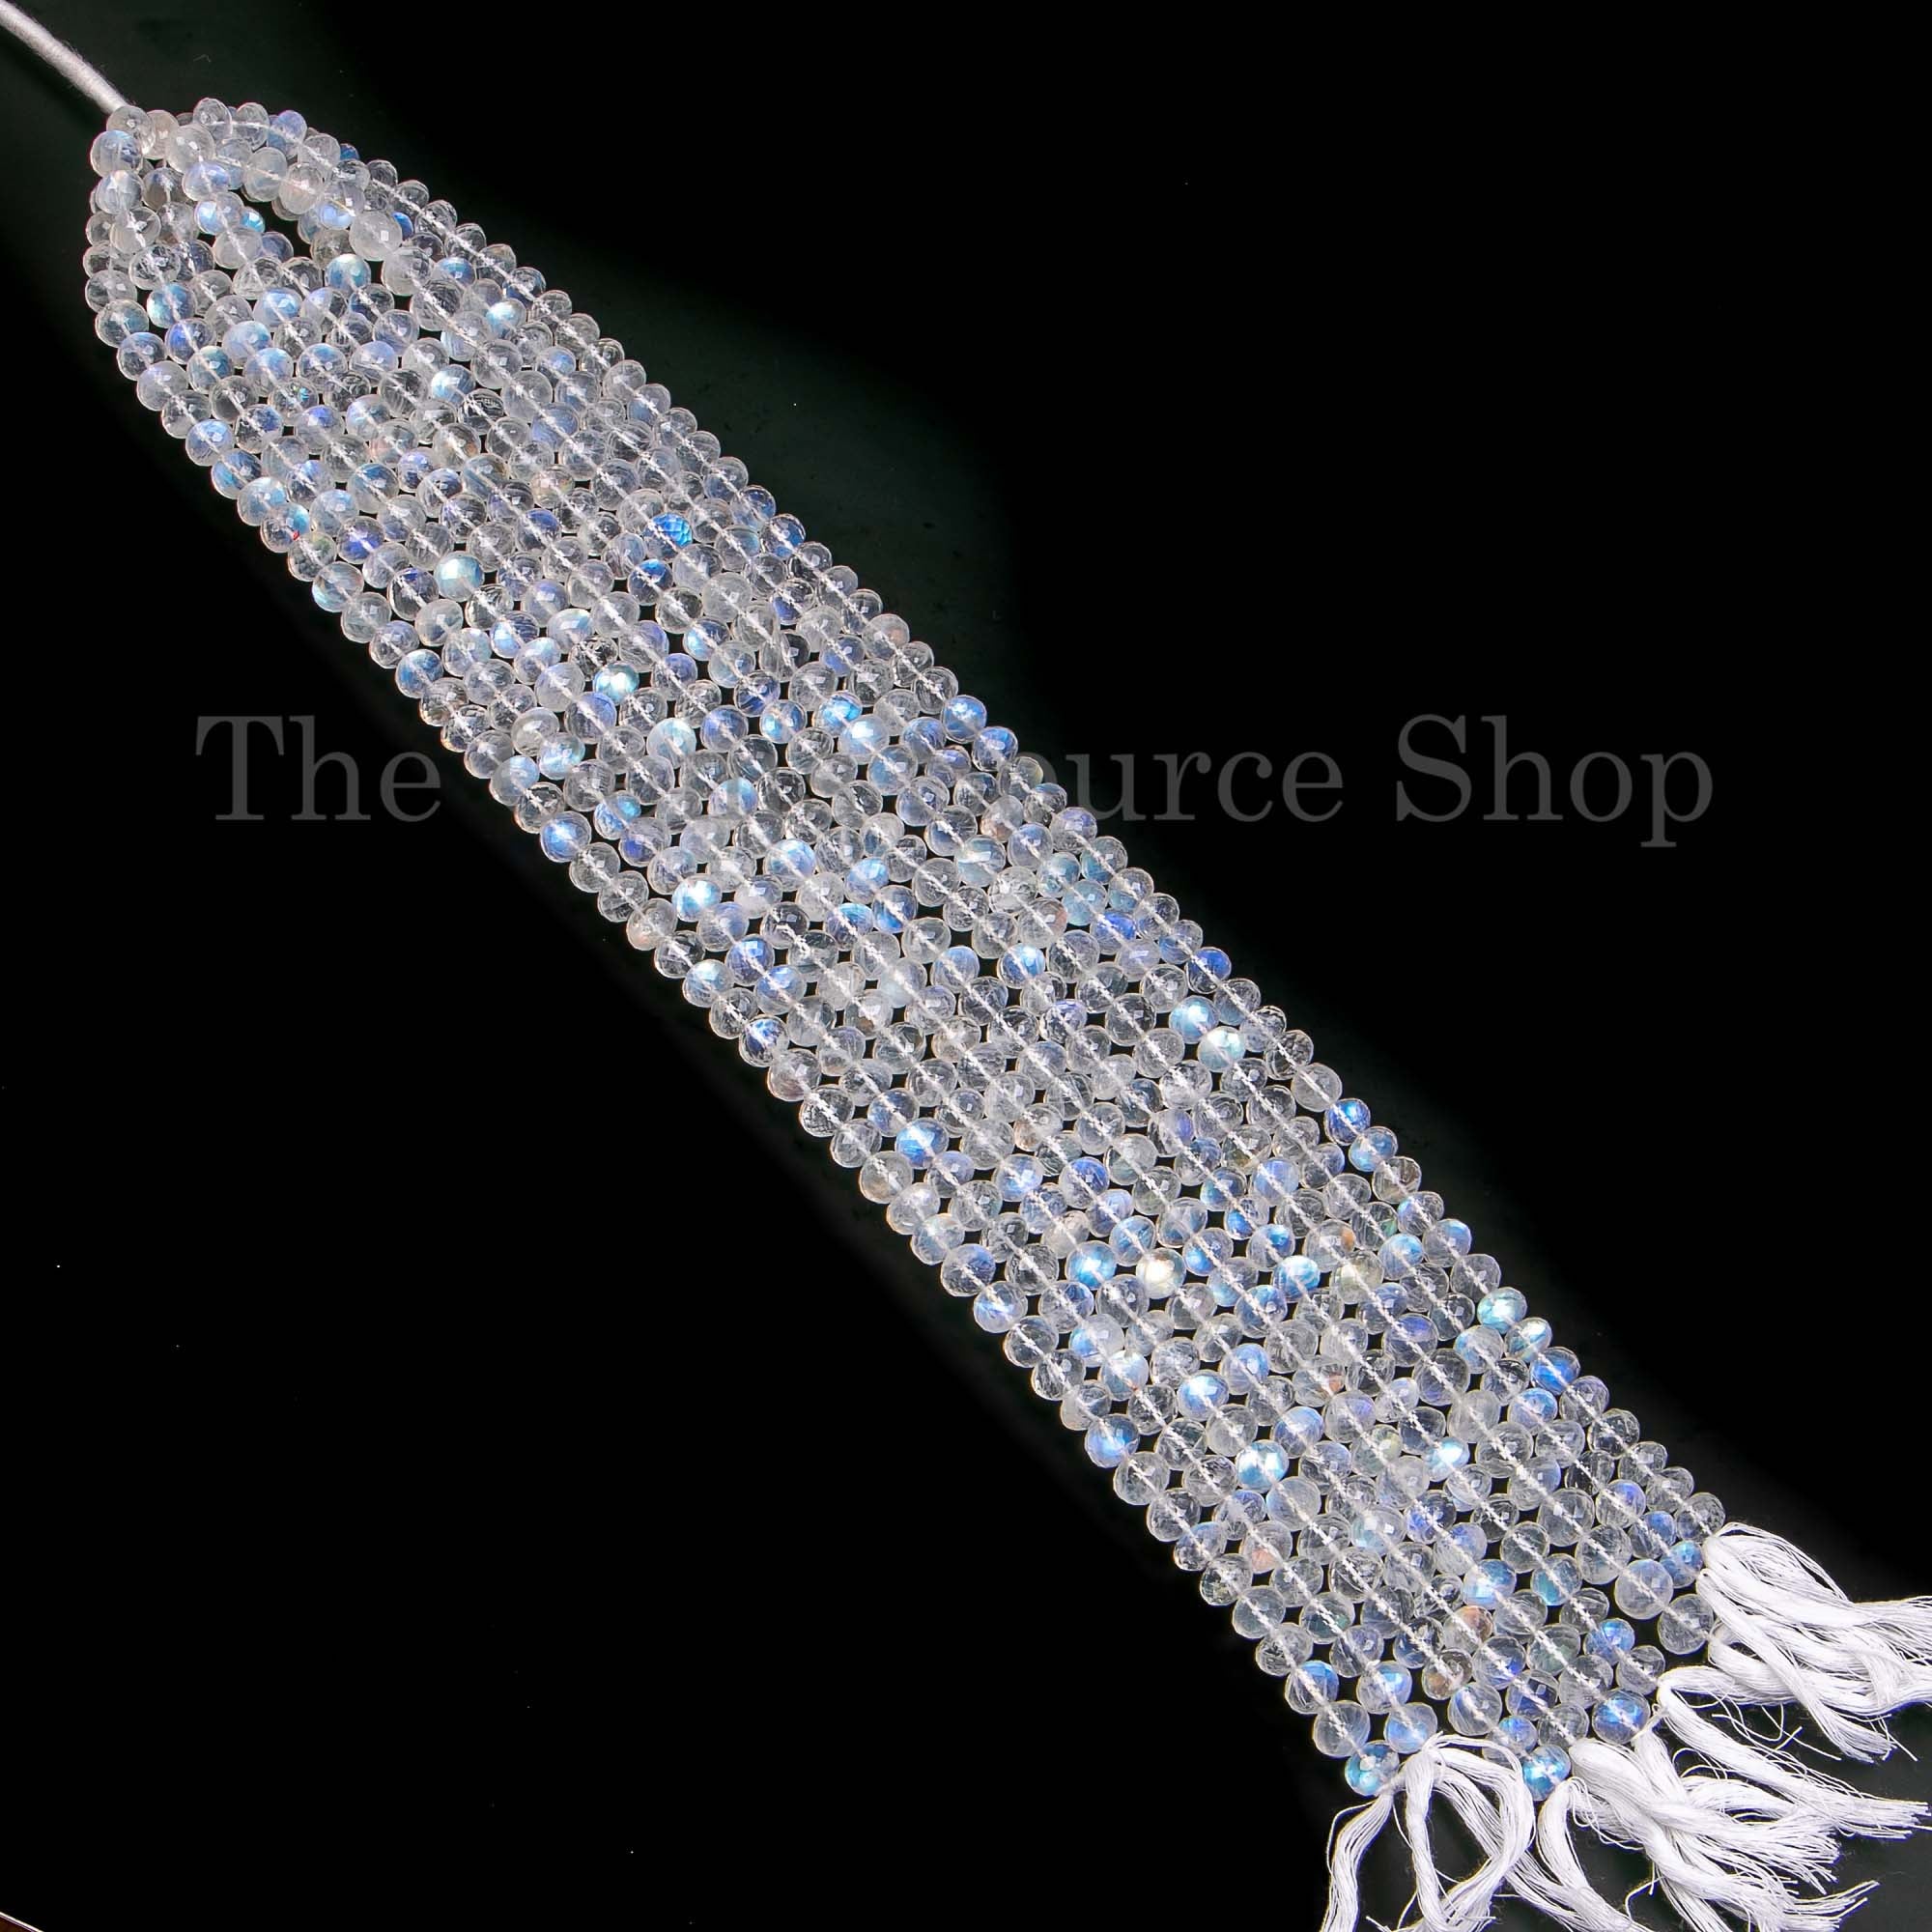 8-8.5mm Natural Rainbow Moonstone Faceted Rondelle Shape Beads, Moonstone Beads